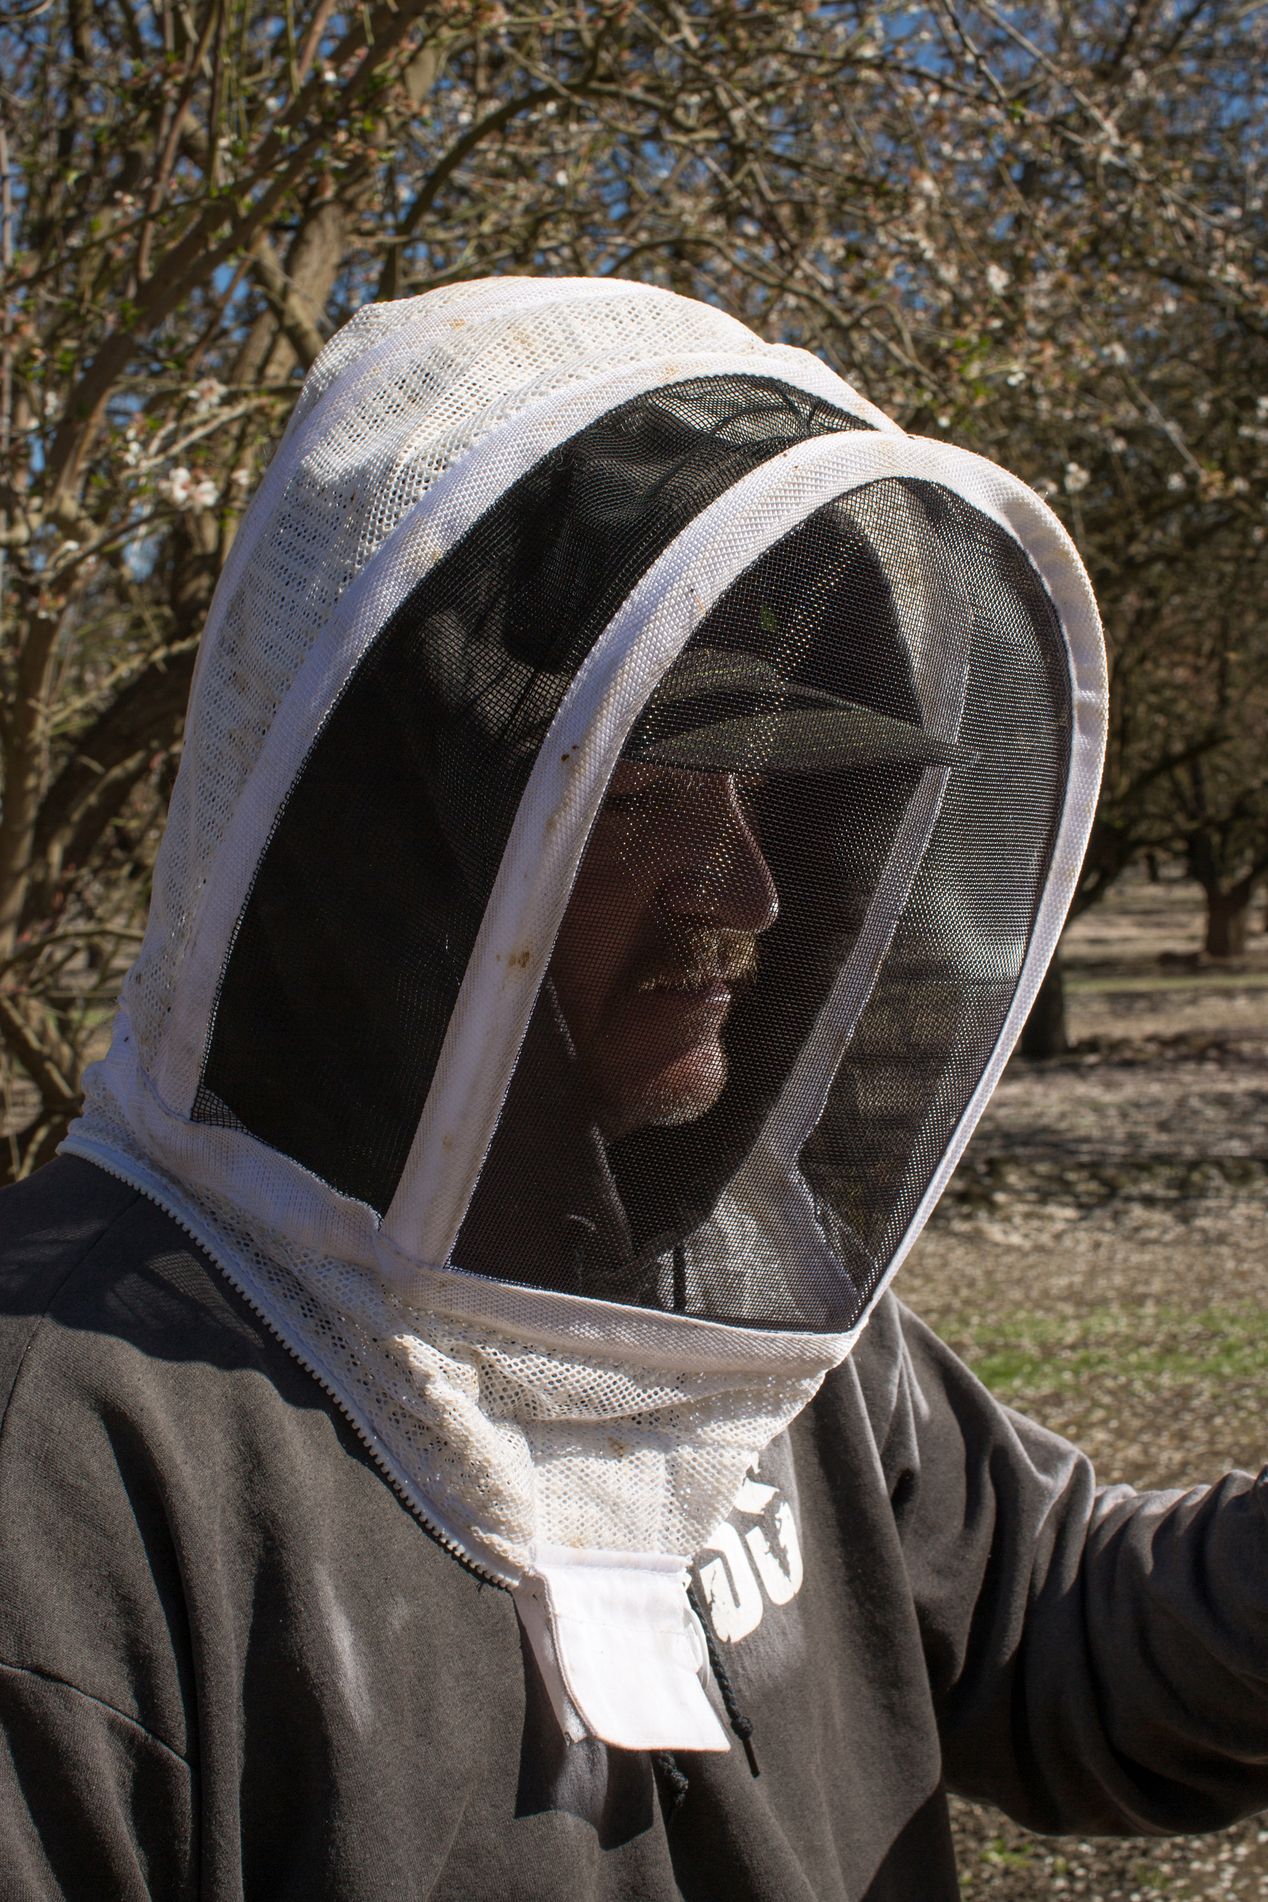 Beekeeper in Central Valley, California, editorial photographer, Ilona Szwarc, Los Angeles. 